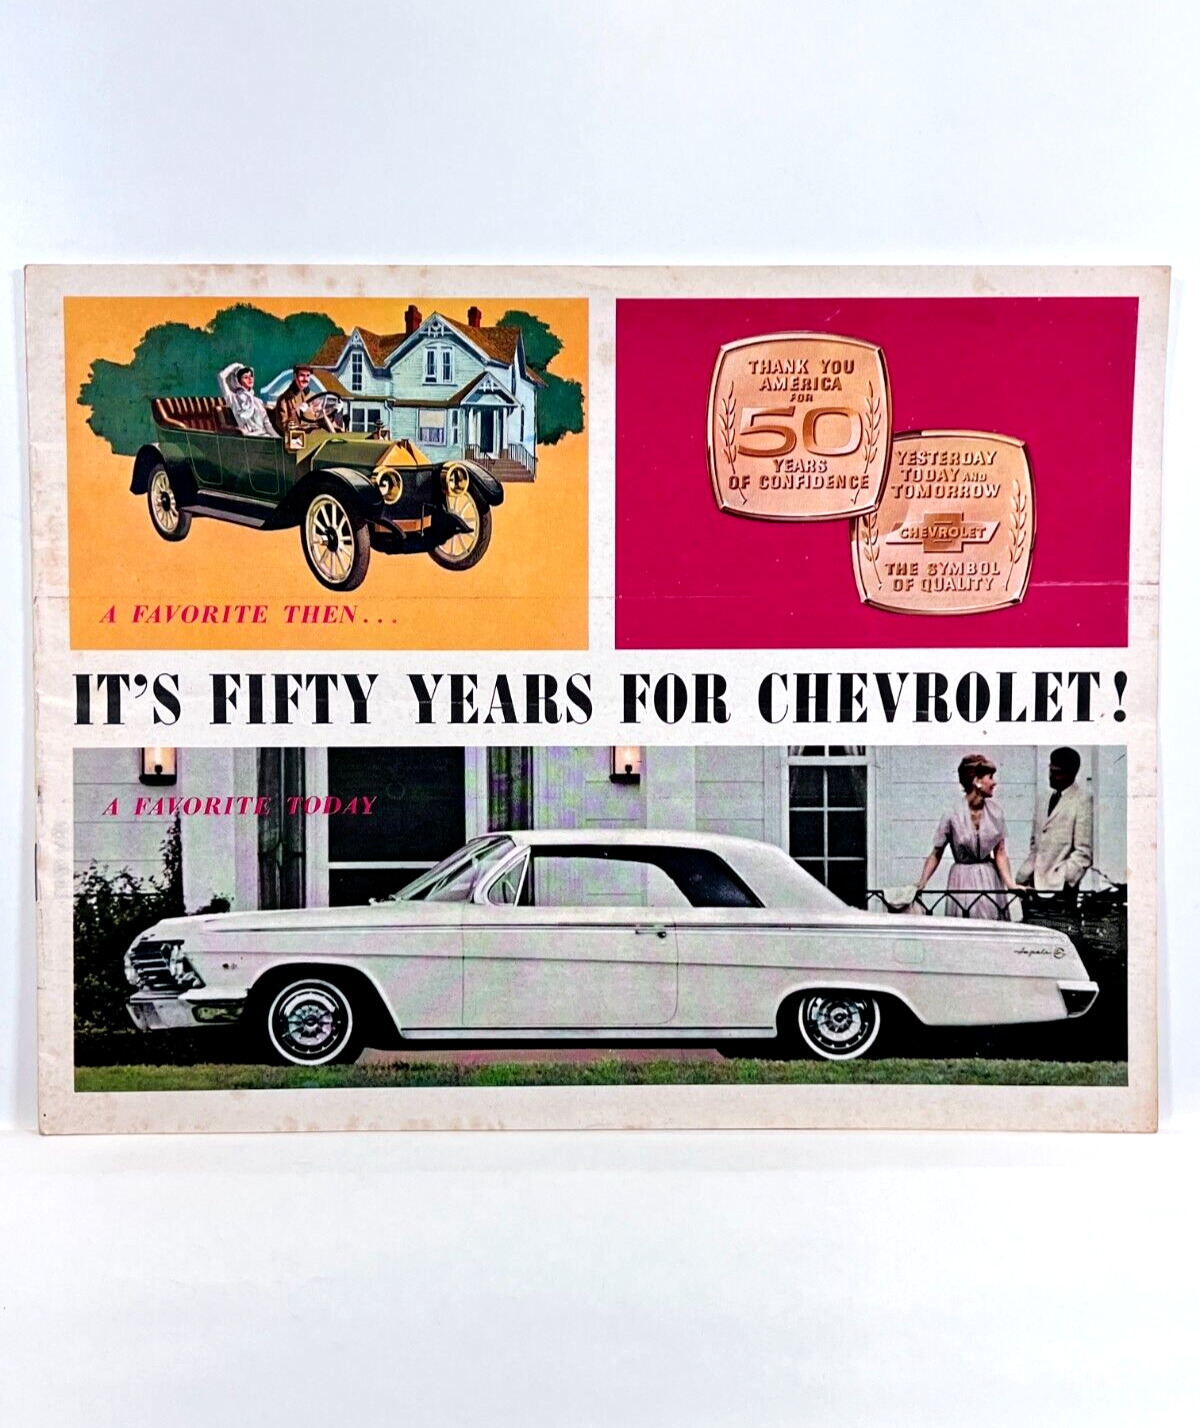 Vintage 1961 Chevrolet 50 Year Anniversary Chevy Classic Car Sales Brochure